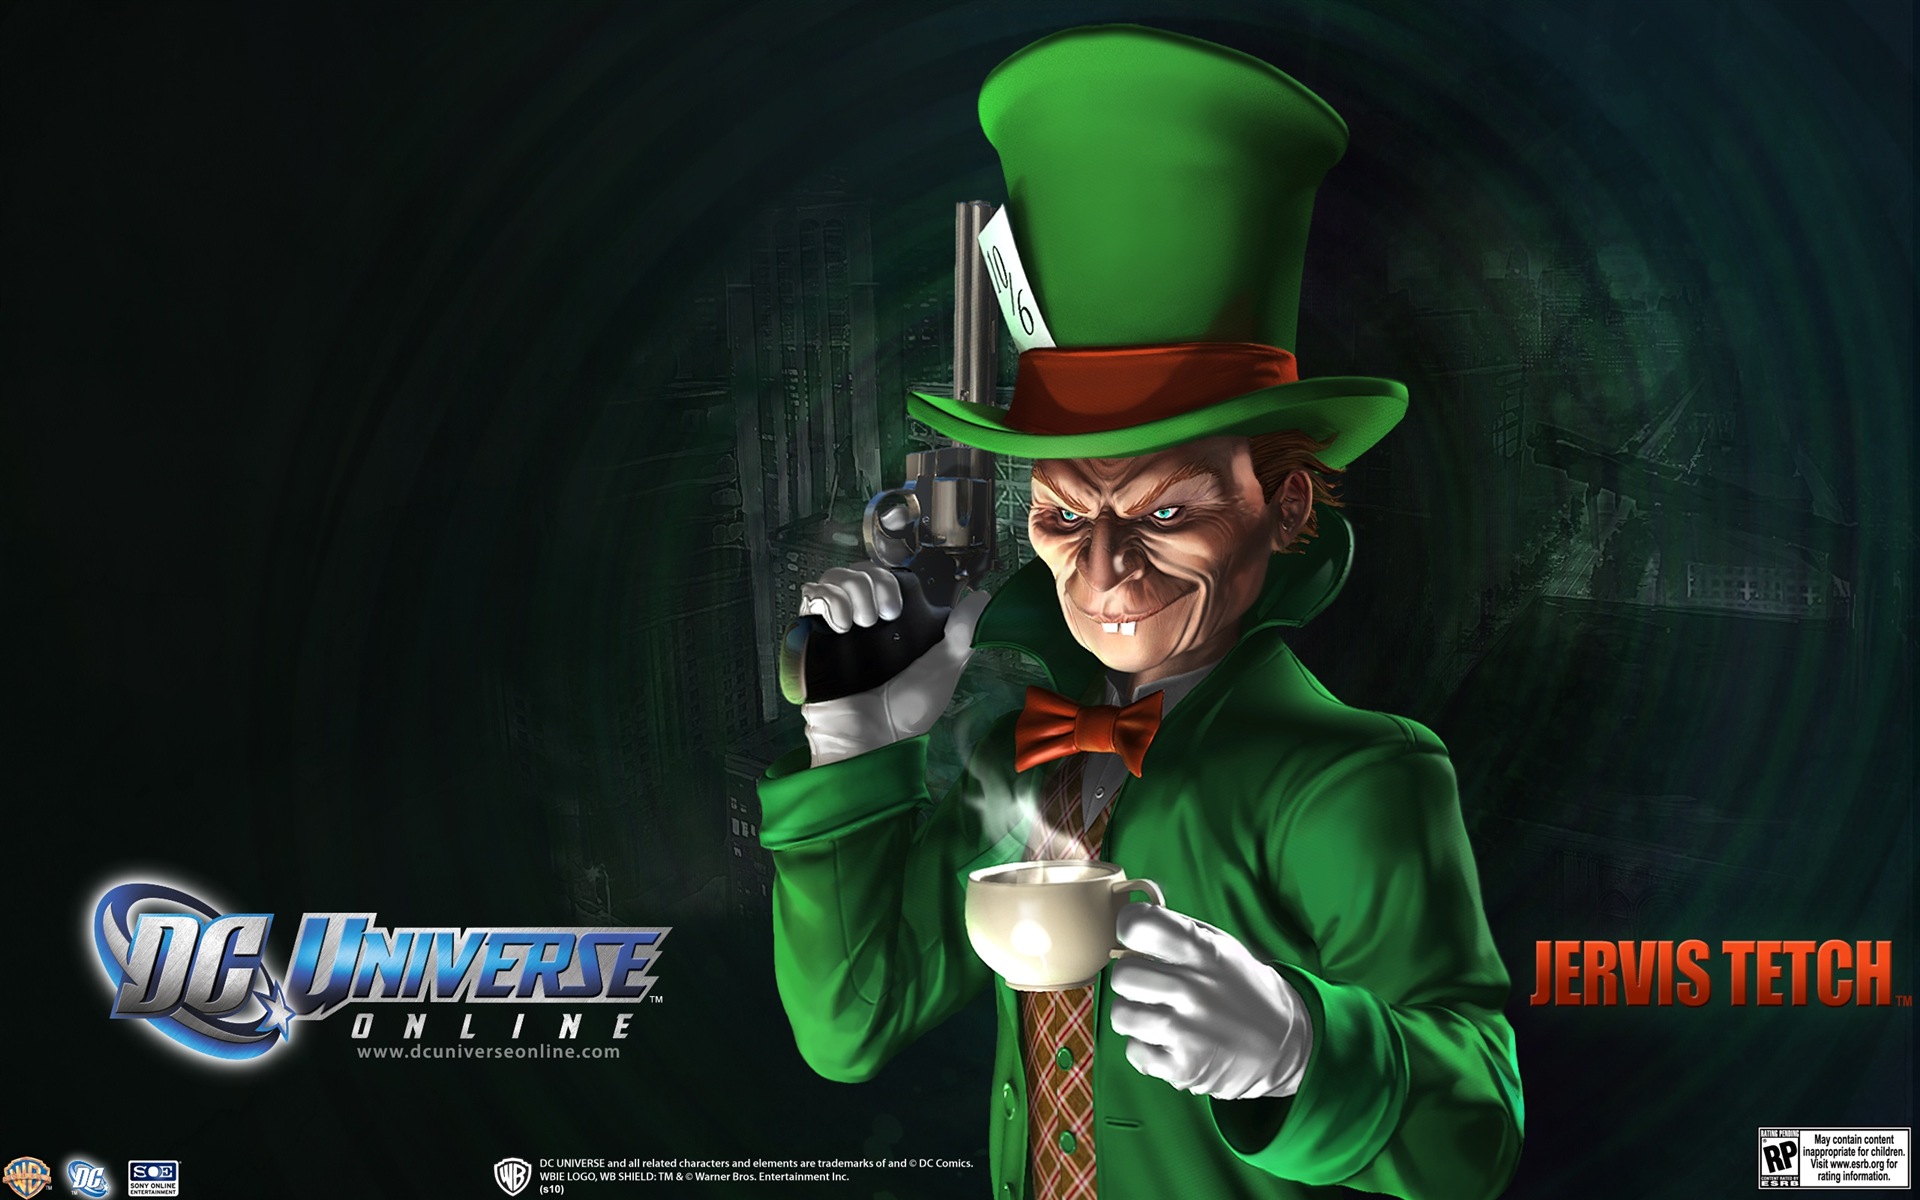 DC Universe Online HD game wallpapers #21 - 1920x1200